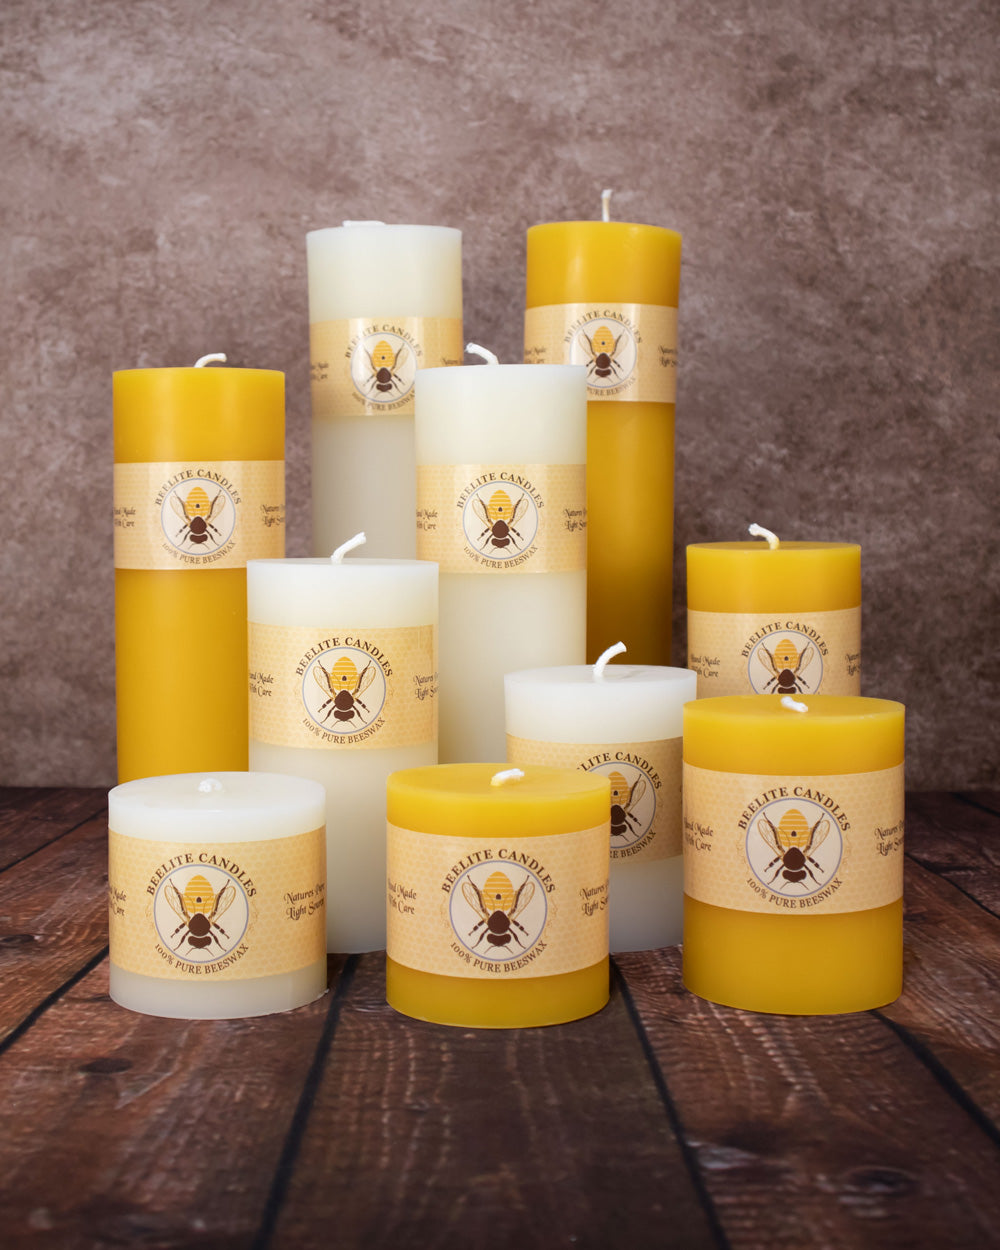 BEESWAX PILLAR Candle 6 Inch Wide / Giant White Bees Wax 4 Wick Candle Set  / 100% All Natural Pure Clean Allergy Friendly USA / Large / Big 